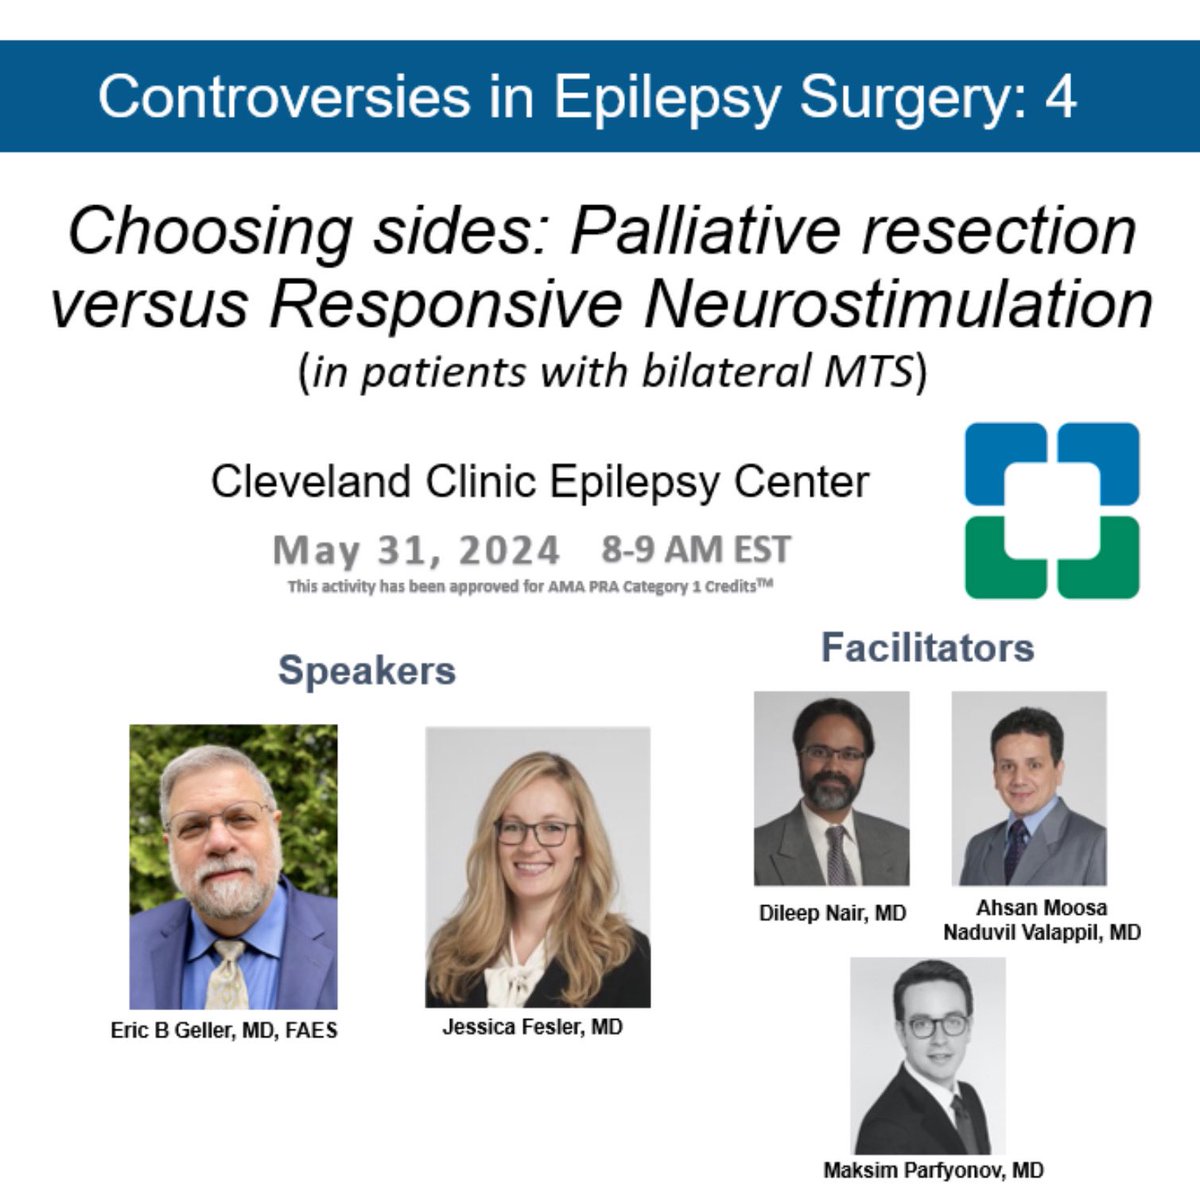 Join us for the final session of our 6-week Neuromodulation series featuring a debate topic. Don't miss it! Link: cmrccf.webex.com/cmrccf/j.php?M… Webinar number: 2437 550 9176   ‼️Webinar password: epilepsy